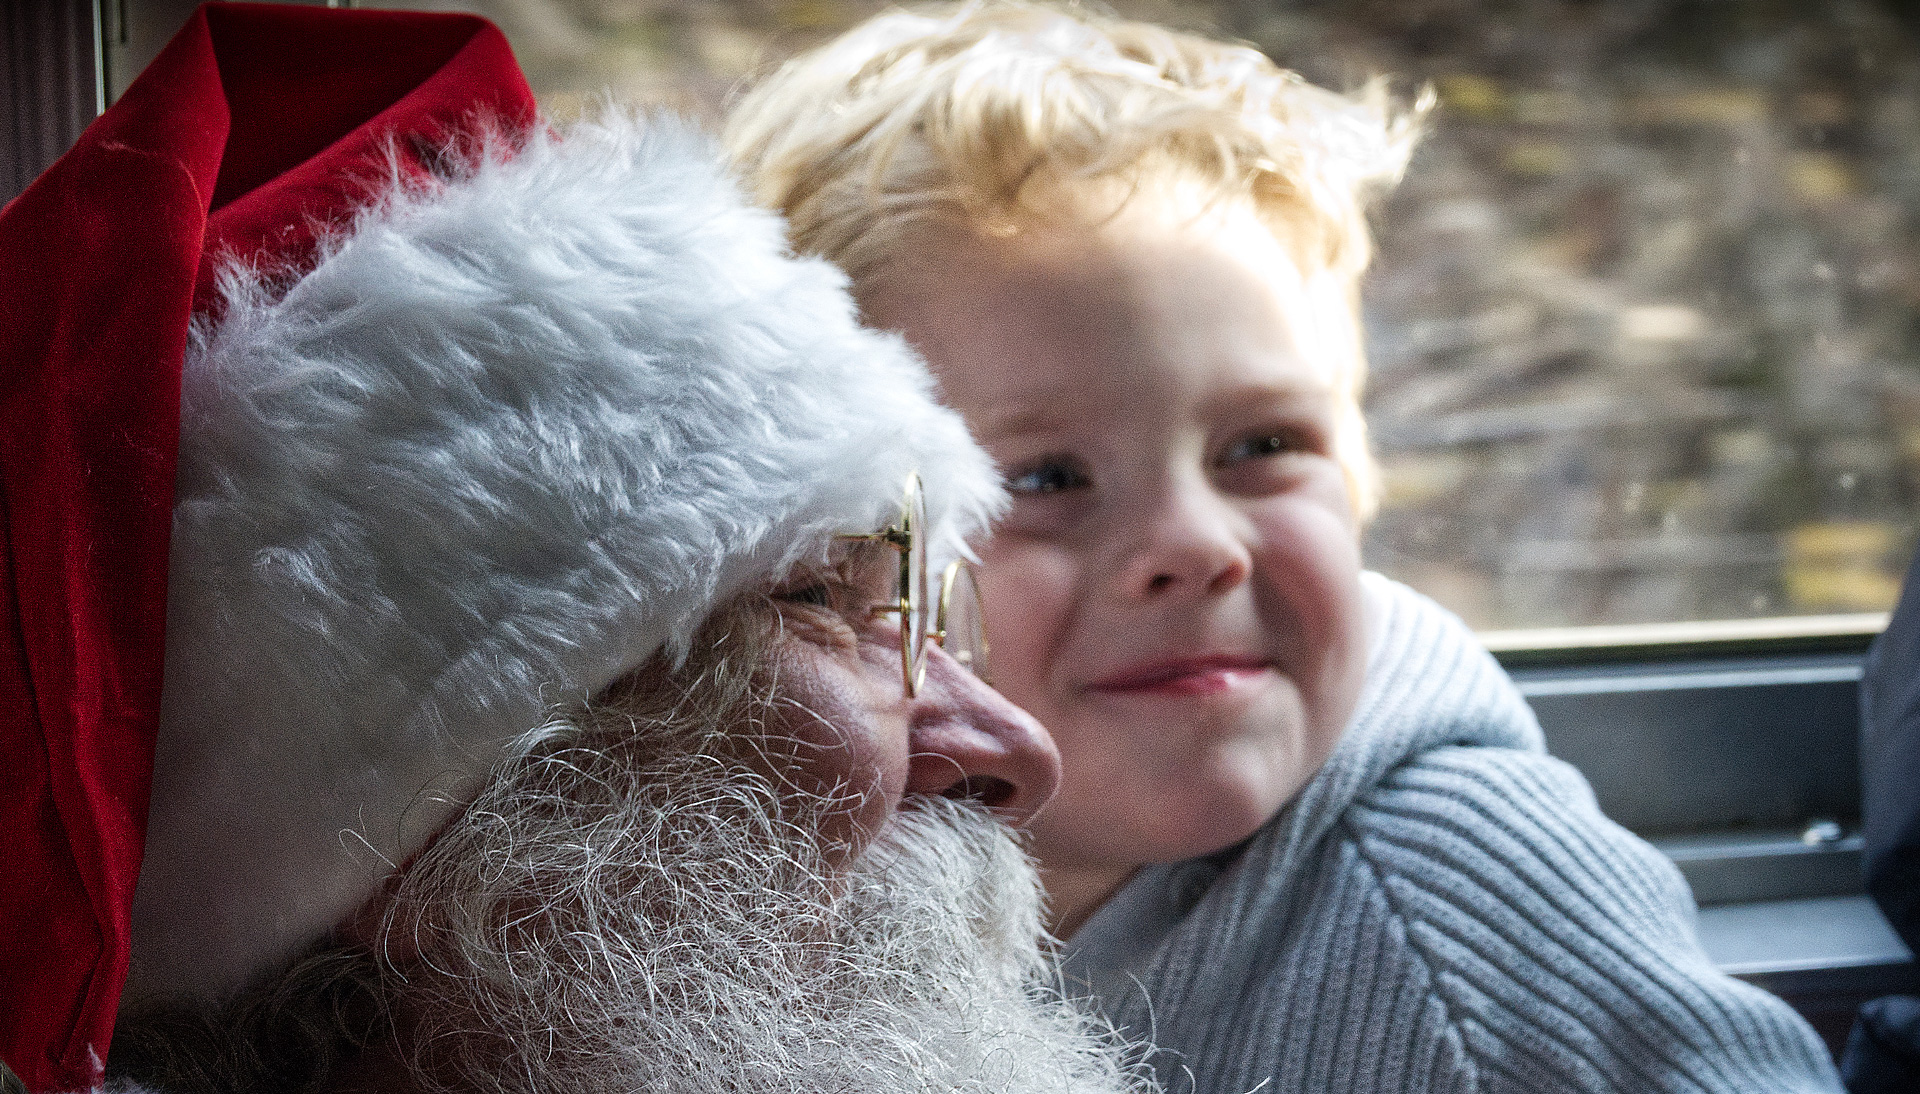 A close up of Santa Claus and a little boy's face smiling